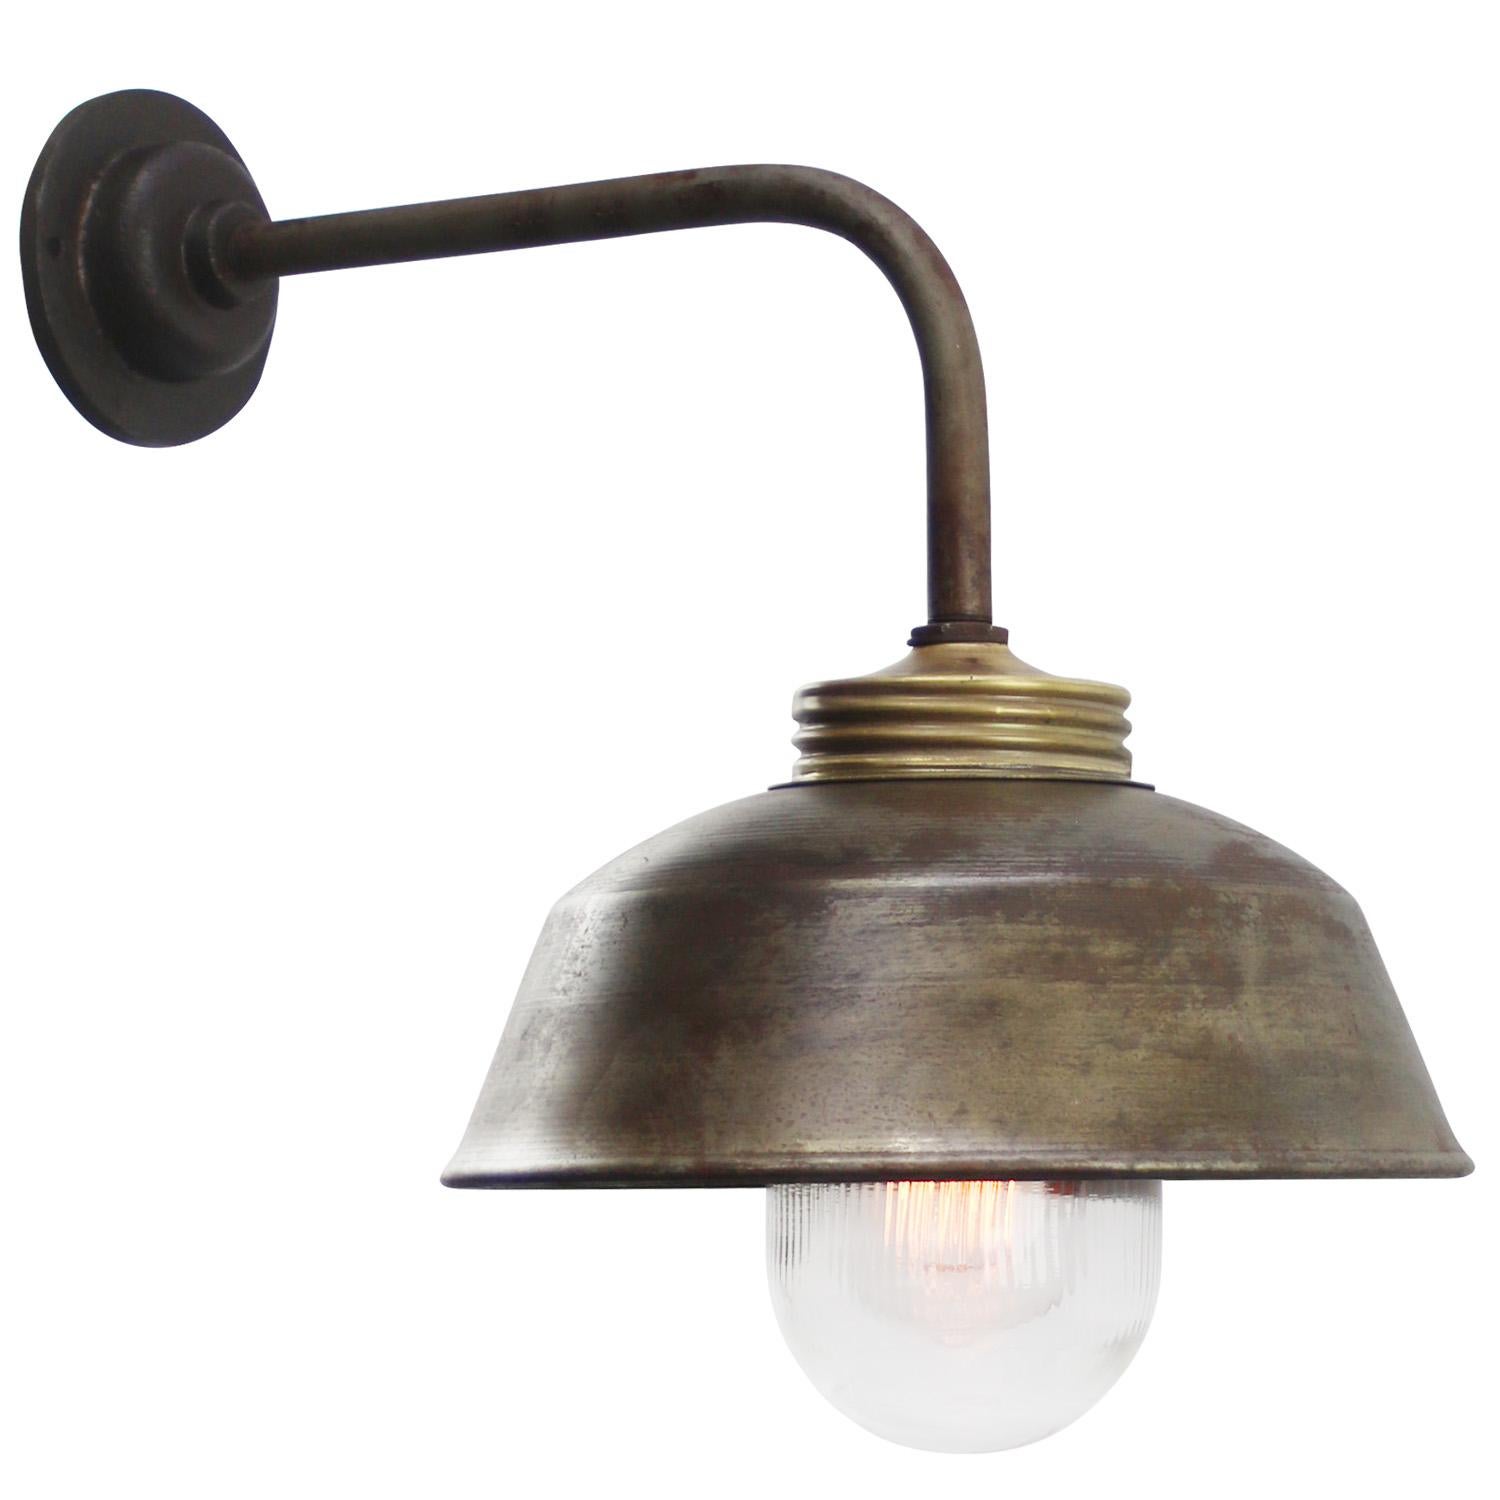 Rust Cast Iron Barn light
Rust Iron shade, brass top, clear striped glass

Diameter cast iron wall piece: 10.5 cm / 4 inches
2 holes to secure

Weight: 2.00 kg / 4.4 lb

Priced per individual item. All lamps have been made suitable by international